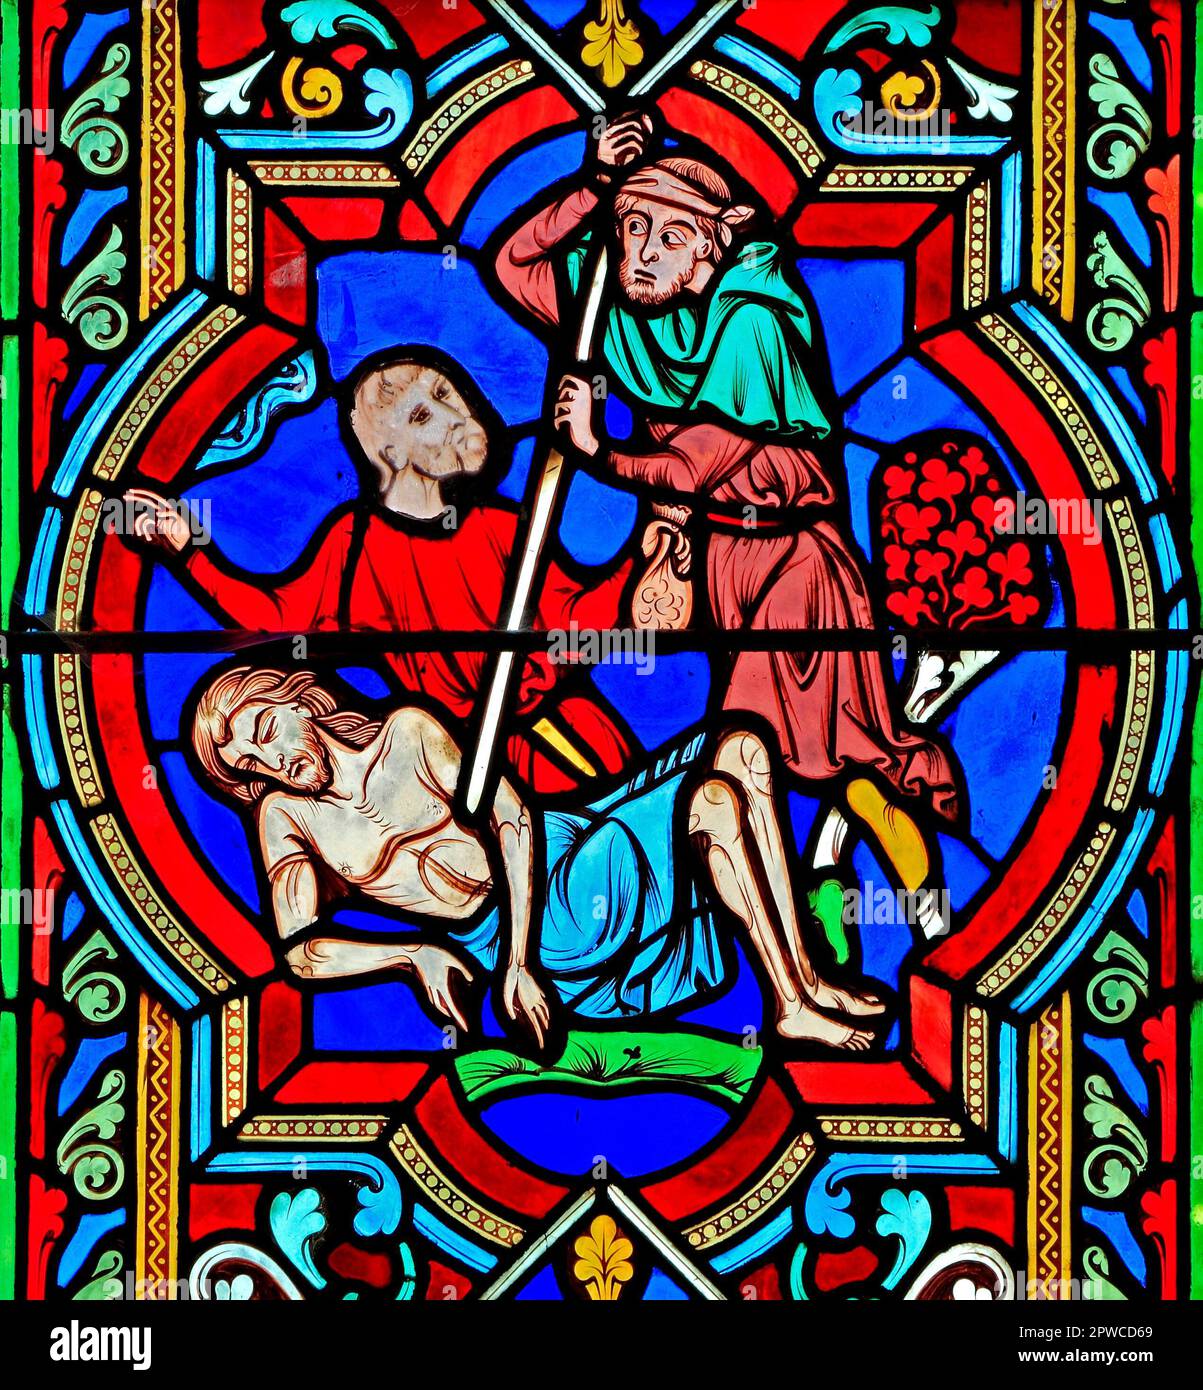 The Good Samaritan Parable, traveller stripped, beaten, left for dead on roadside, stained glass window, by Oudinot of Paris, 1859, Feltwell, Norfolk Stock Photo